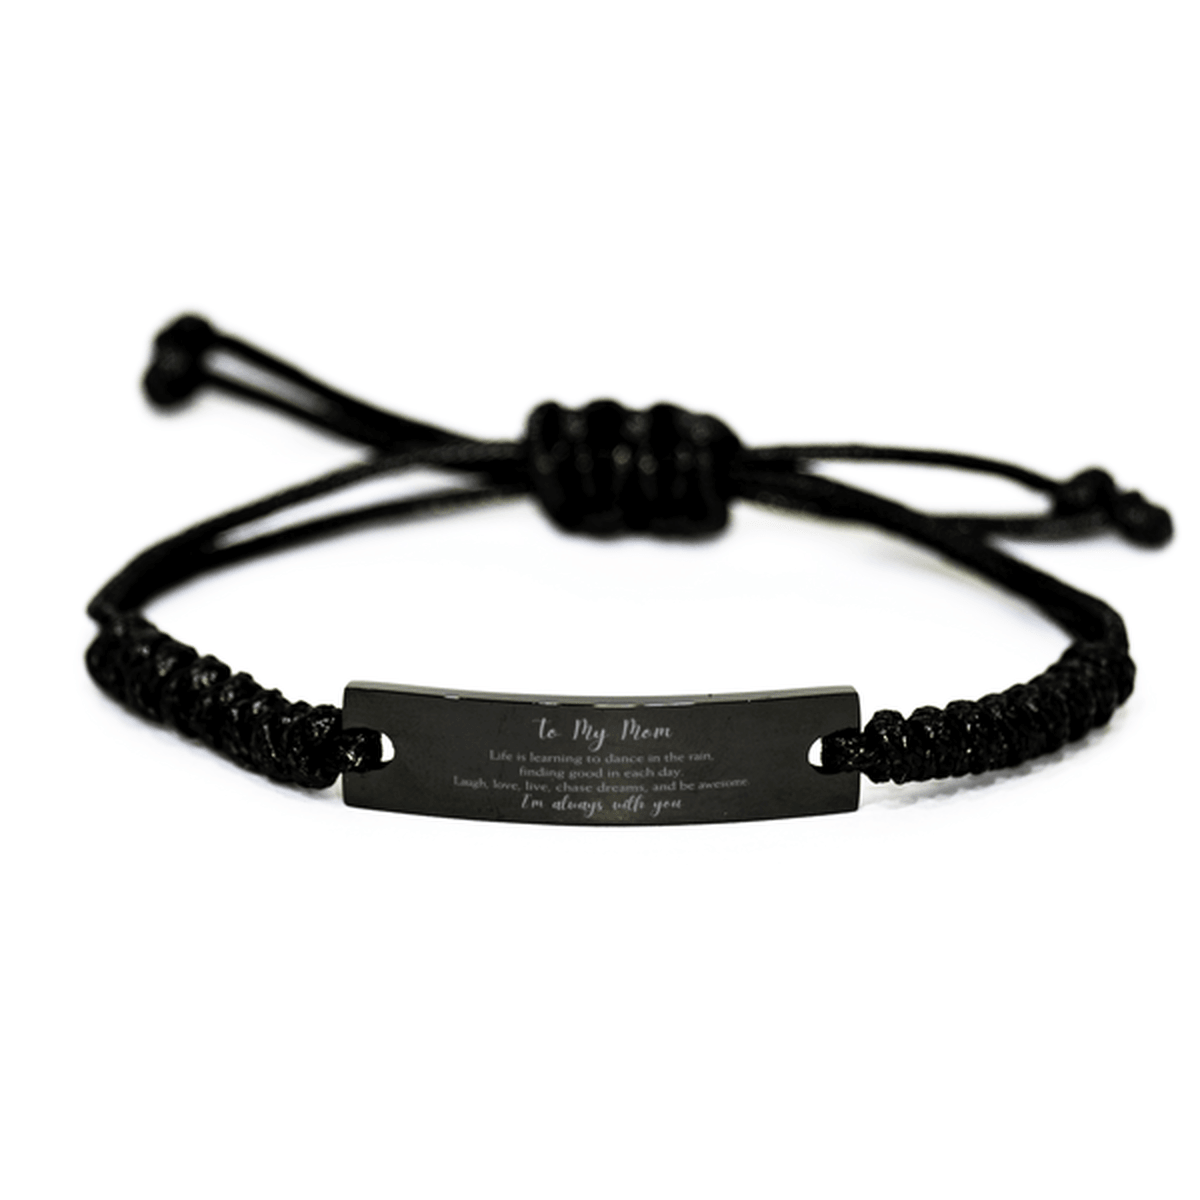 Mom Christmas Perfect Gifts, Mom Black Rope Bracelet, Motivational Mom Engraved Gifts, Birthday Gifts For Mom, To My Mom Life is learning to dance in the rain, finding good in each day. I'm always with you